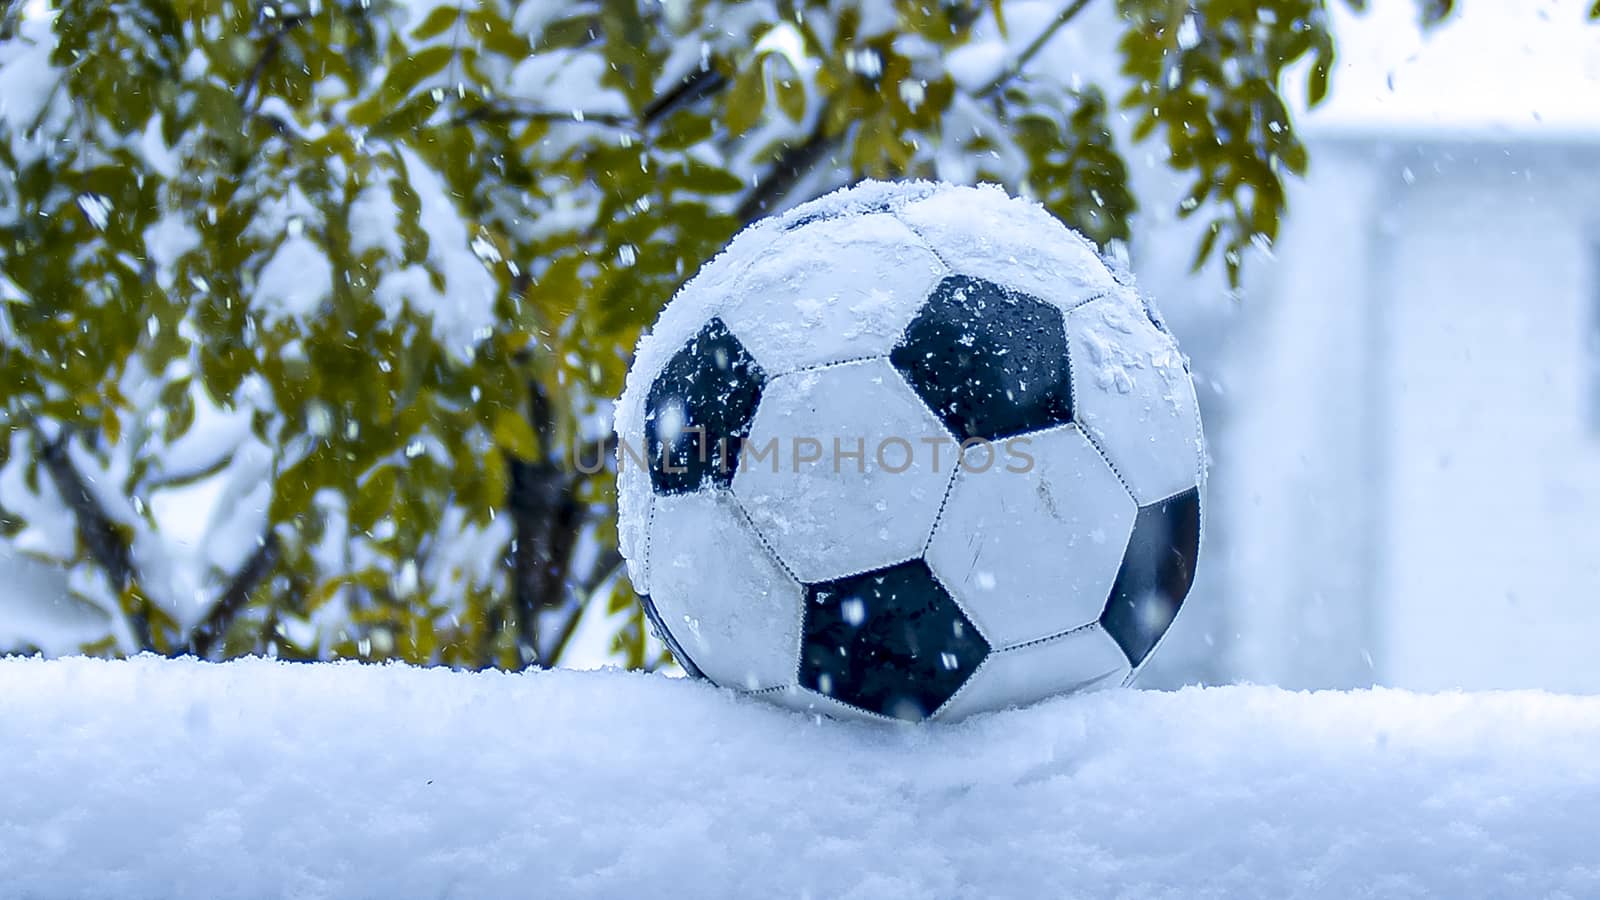 Soccer ball, football during a snowing day